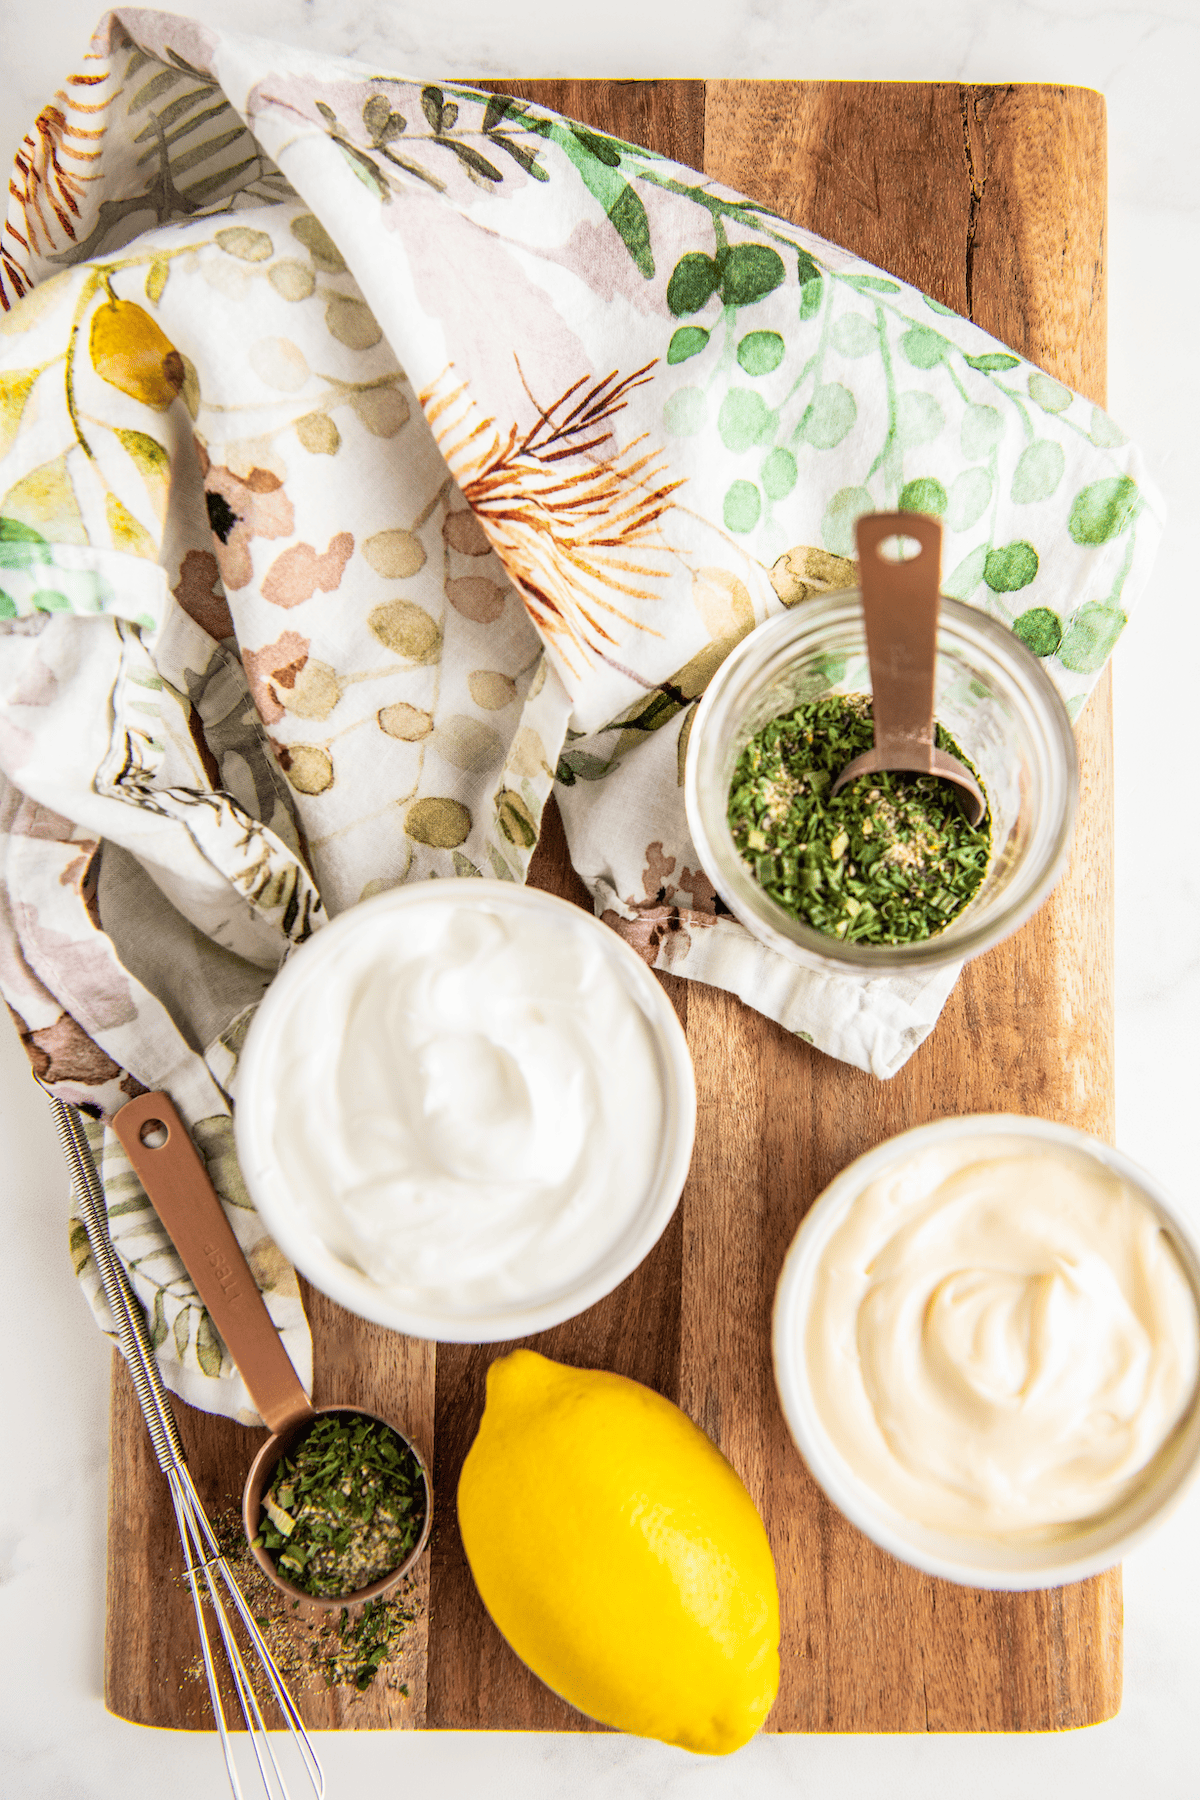 Overhead view of the ingredients needed for ranch dressing: a bowl of sour cream, a bowl of mayo, a lemon, and a jar of ranch seasoning with a spoon in it, next to a measuring spoon and kitchen towels